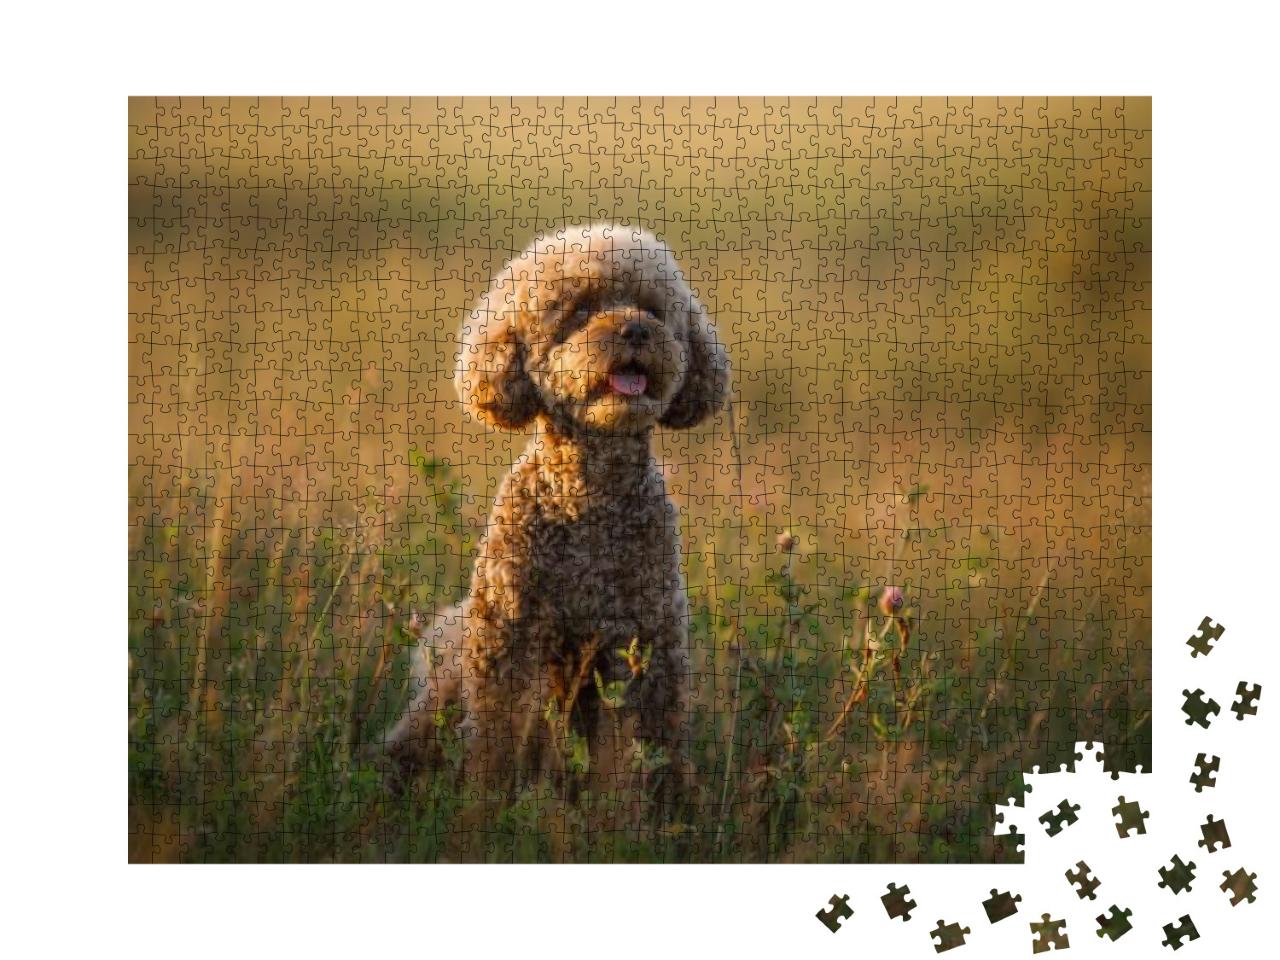 Miniature Chocolate Poodle on the Grass. Pet in Nature. C... Jigsaw Puzzle with 1000 pieces